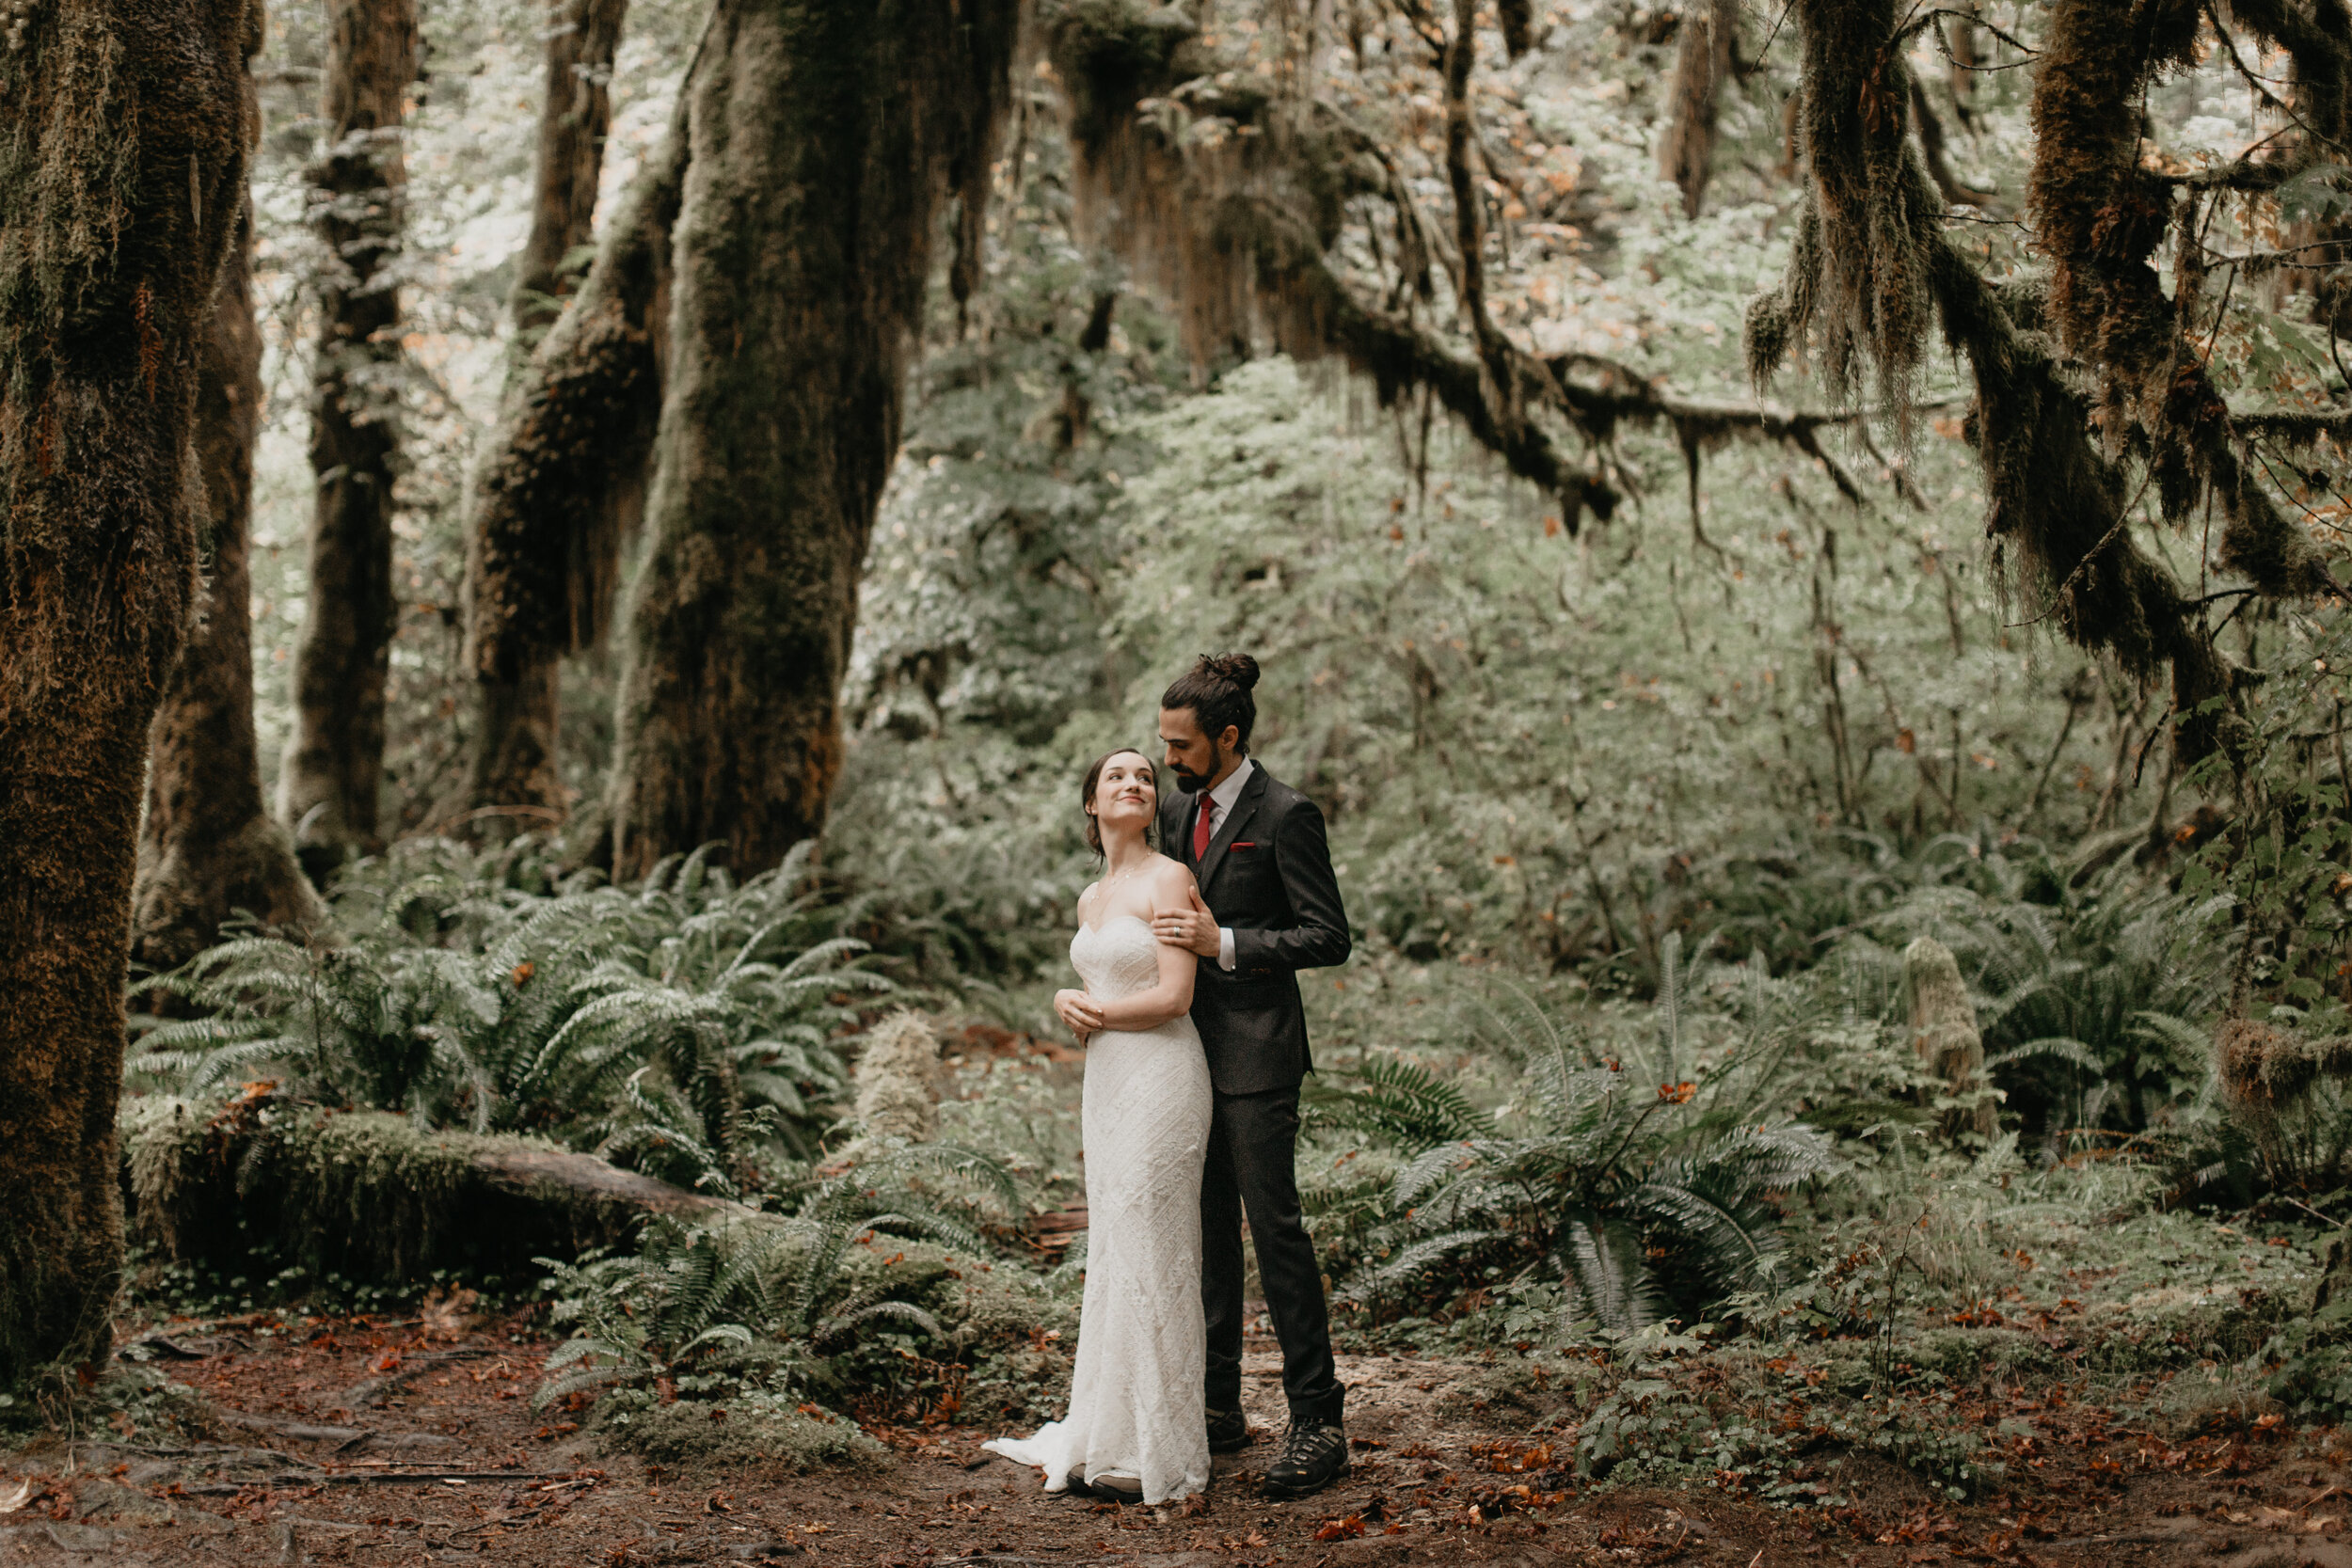 Nicole-Daacke-Photography-Olympic-national-park-elopement-photography-intimiate-elopement-in-olympic-peninsula-washington-state-rainy-day-ruby-beach-hoh-rainforest-elopement-inspiration-rainforest-pnw-elopement-photography-136.jpg